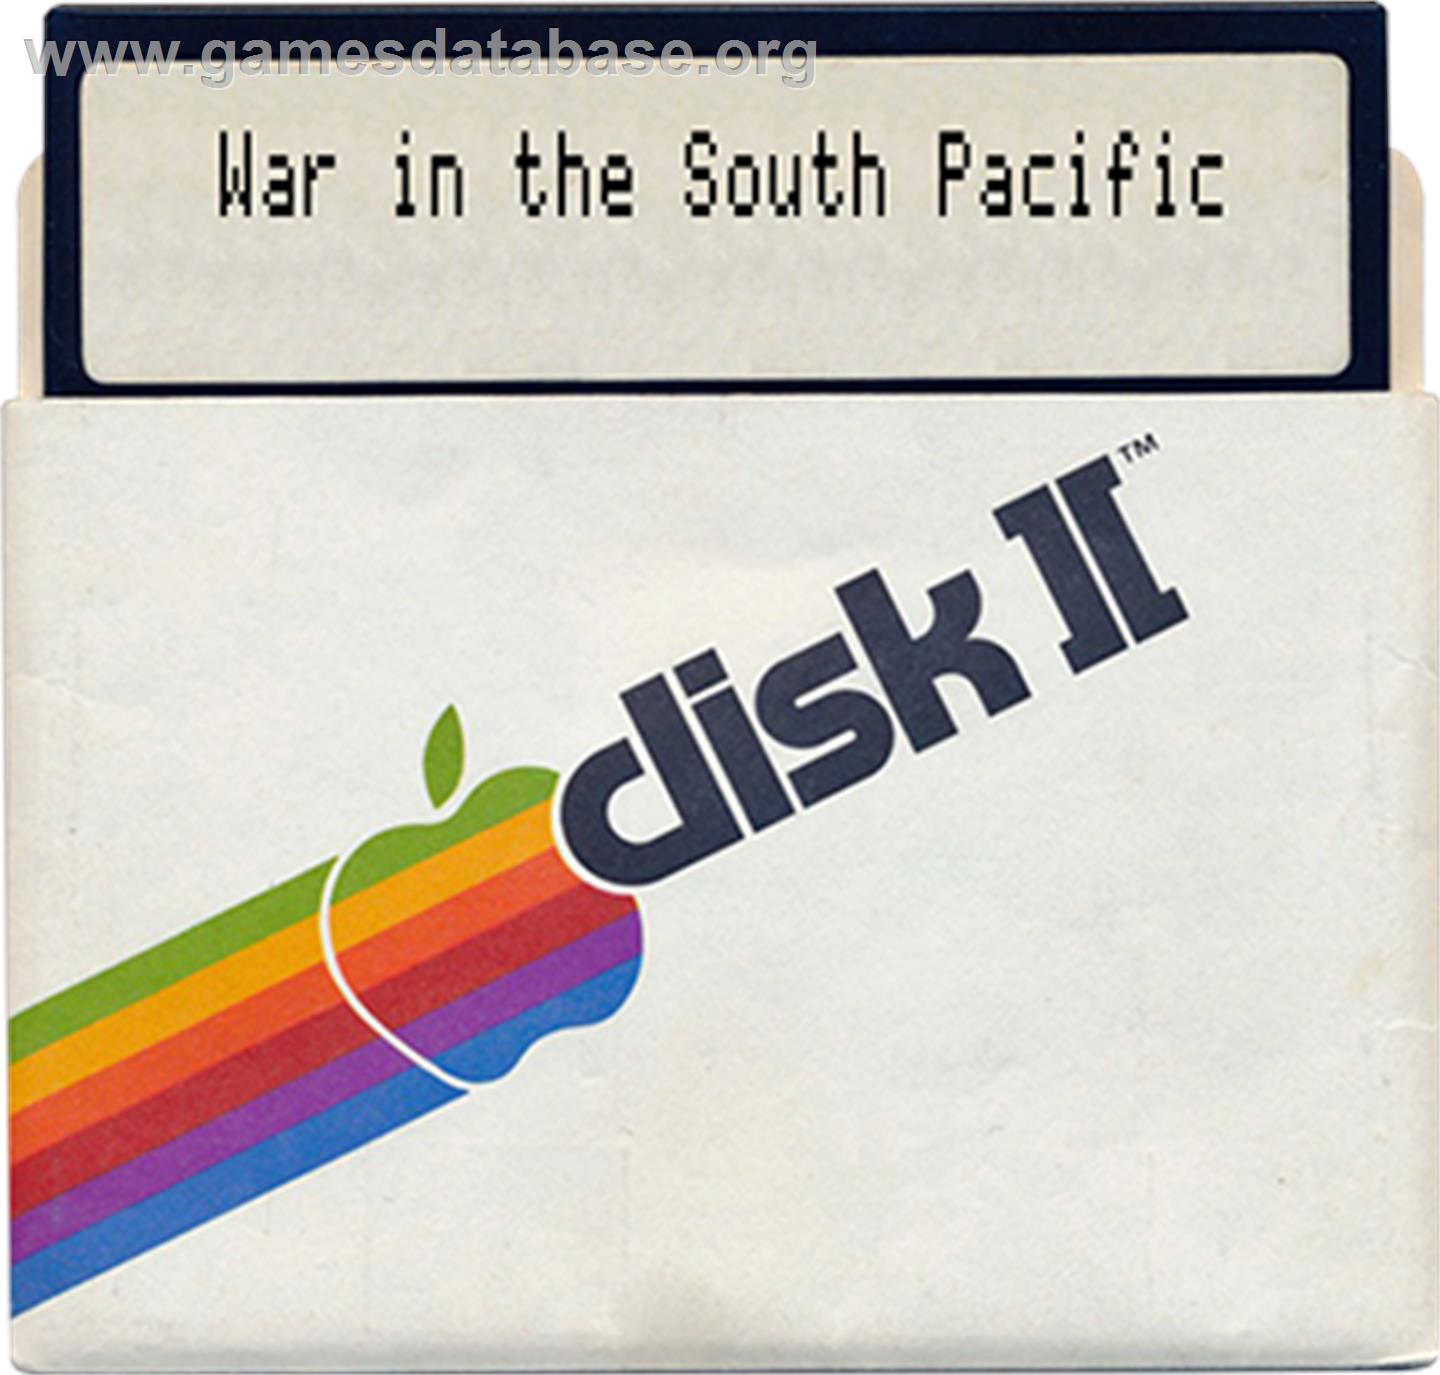 War in the South Pacific - Apple II - Artwork - Disc